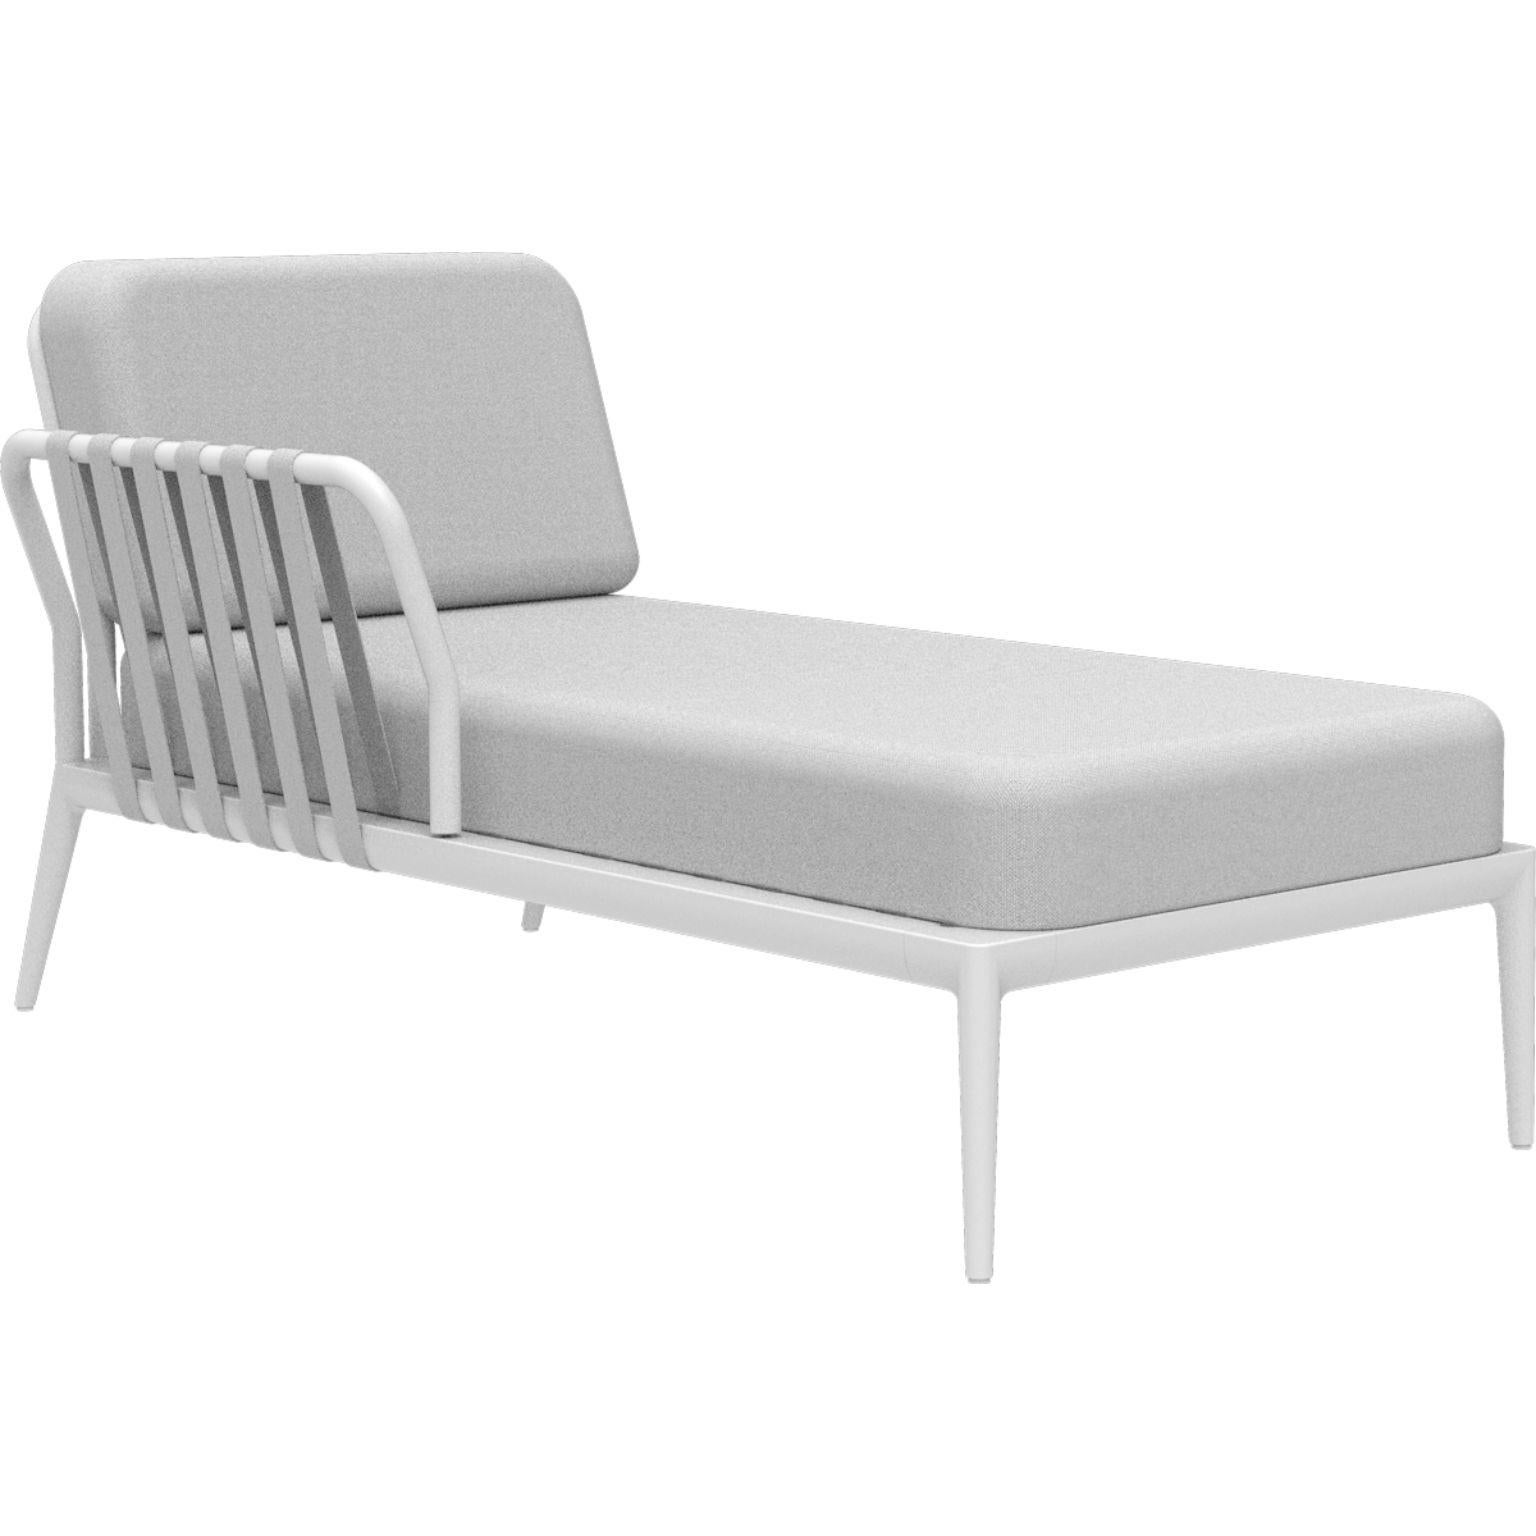 Ribbons white right chaise longue by MOWEE
Dimensions: D80 x W155 x H81 cm
Material: aluminum, upholstery
Weight: 28 kg
Also available in different colours and finishes.

An unmistakable collection for its beauty and robustness. A tribute to